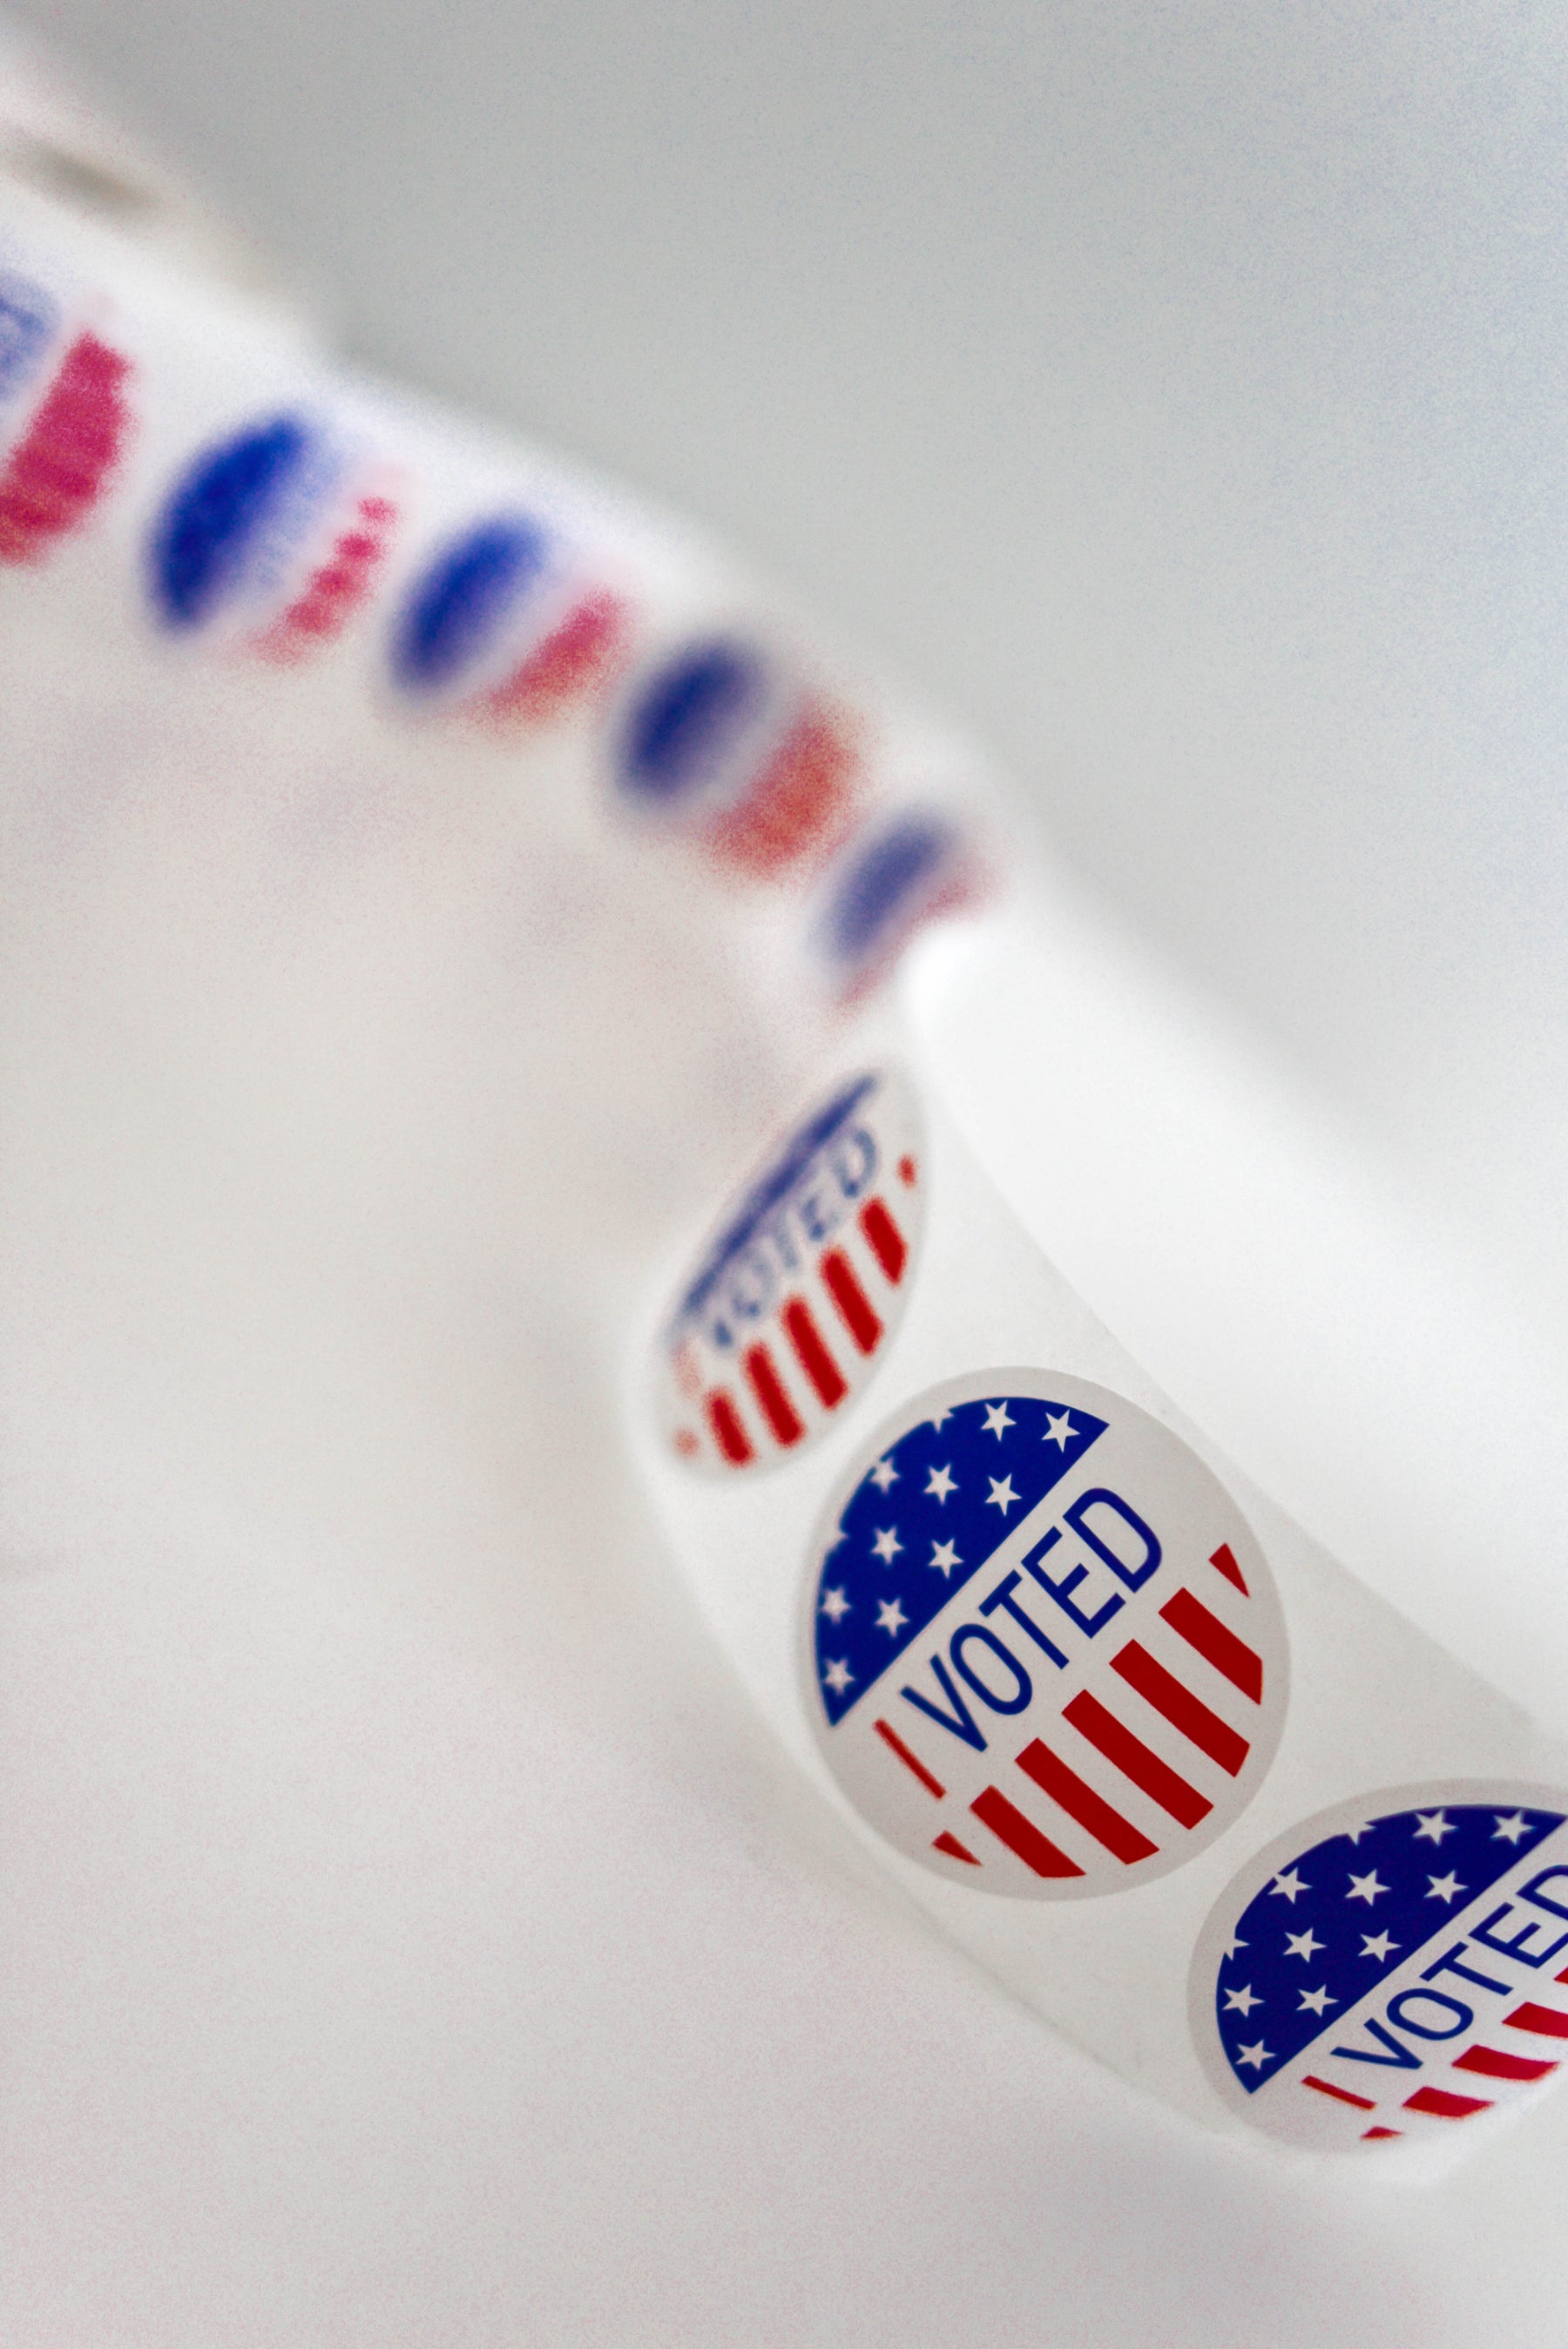 election day closure  - I voted sticker